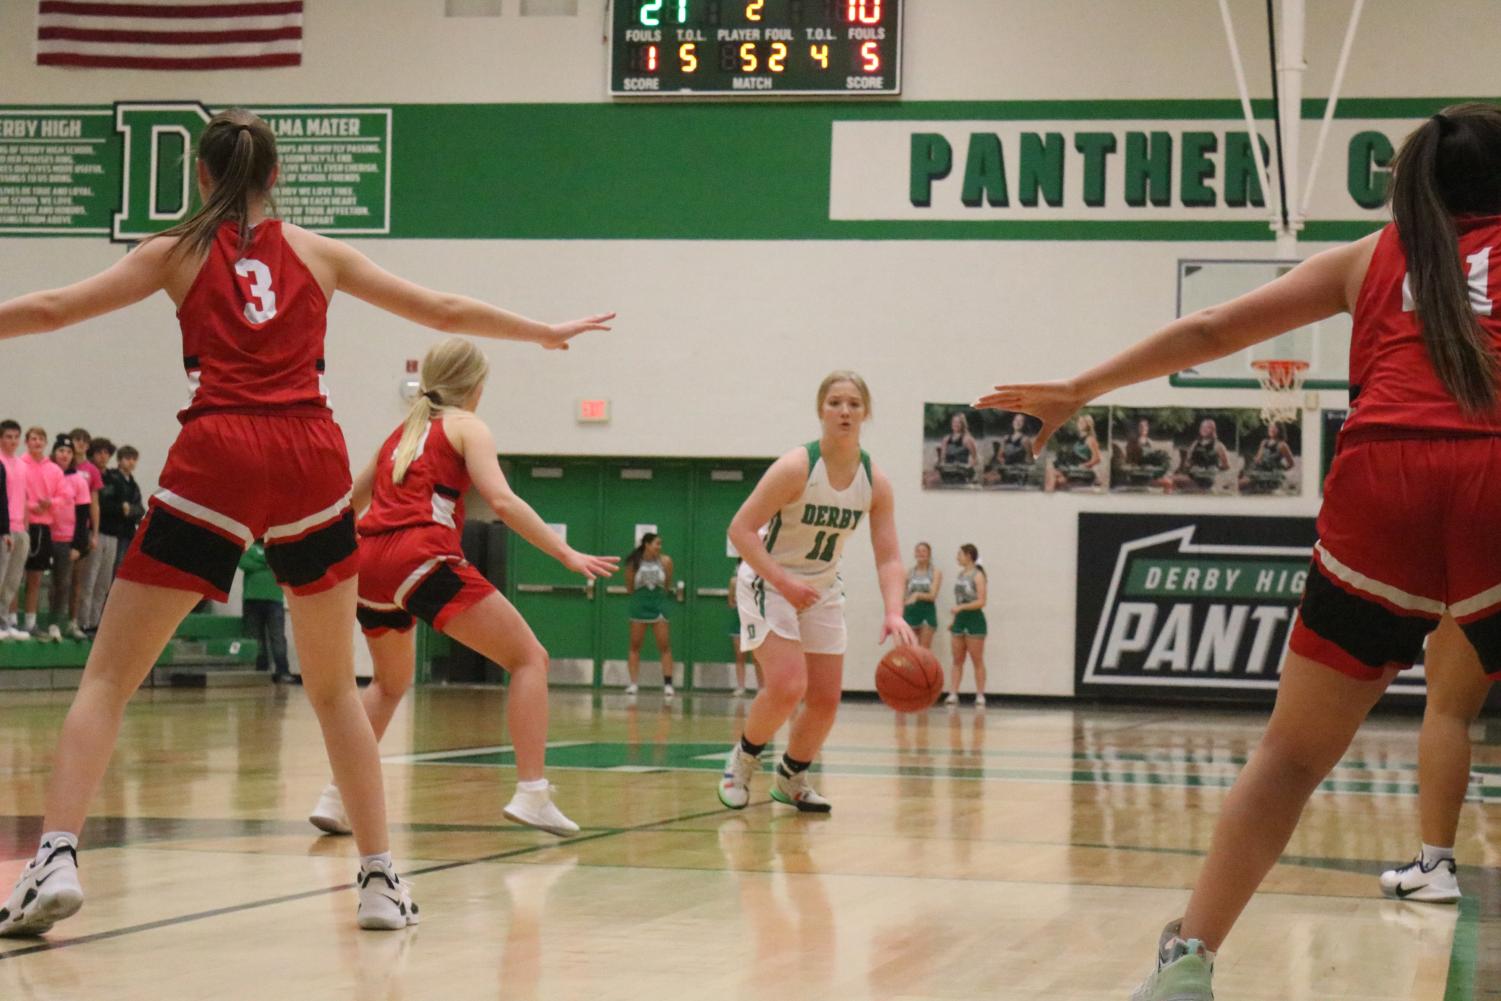 1%2F21%2F22+Varsity+Girls+Basketball+vs.+Maize+%28Photos+by+Laurisa+Rooney%29